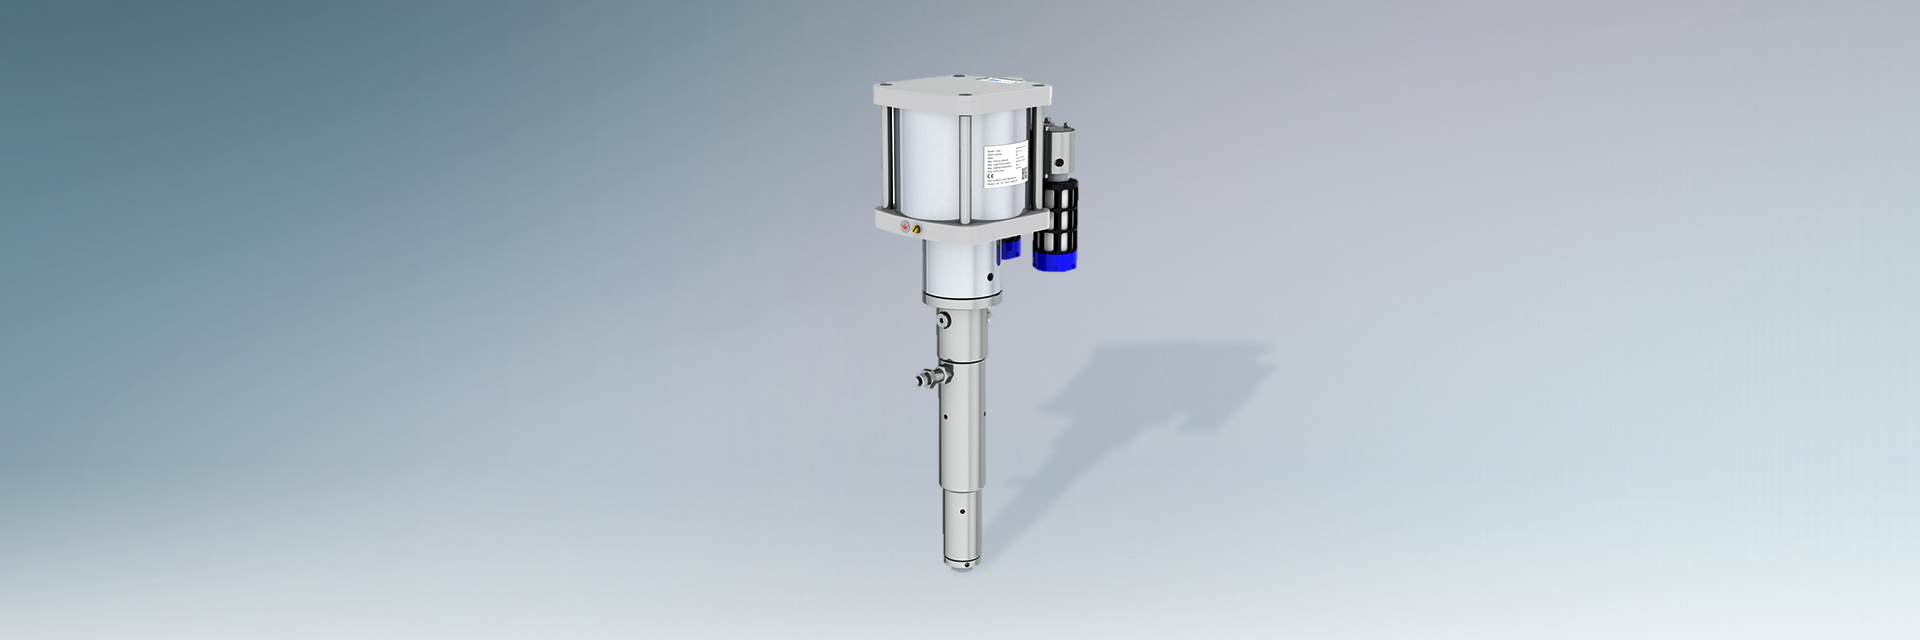 Air operated vertical piston pump for medium and high pressure applications.